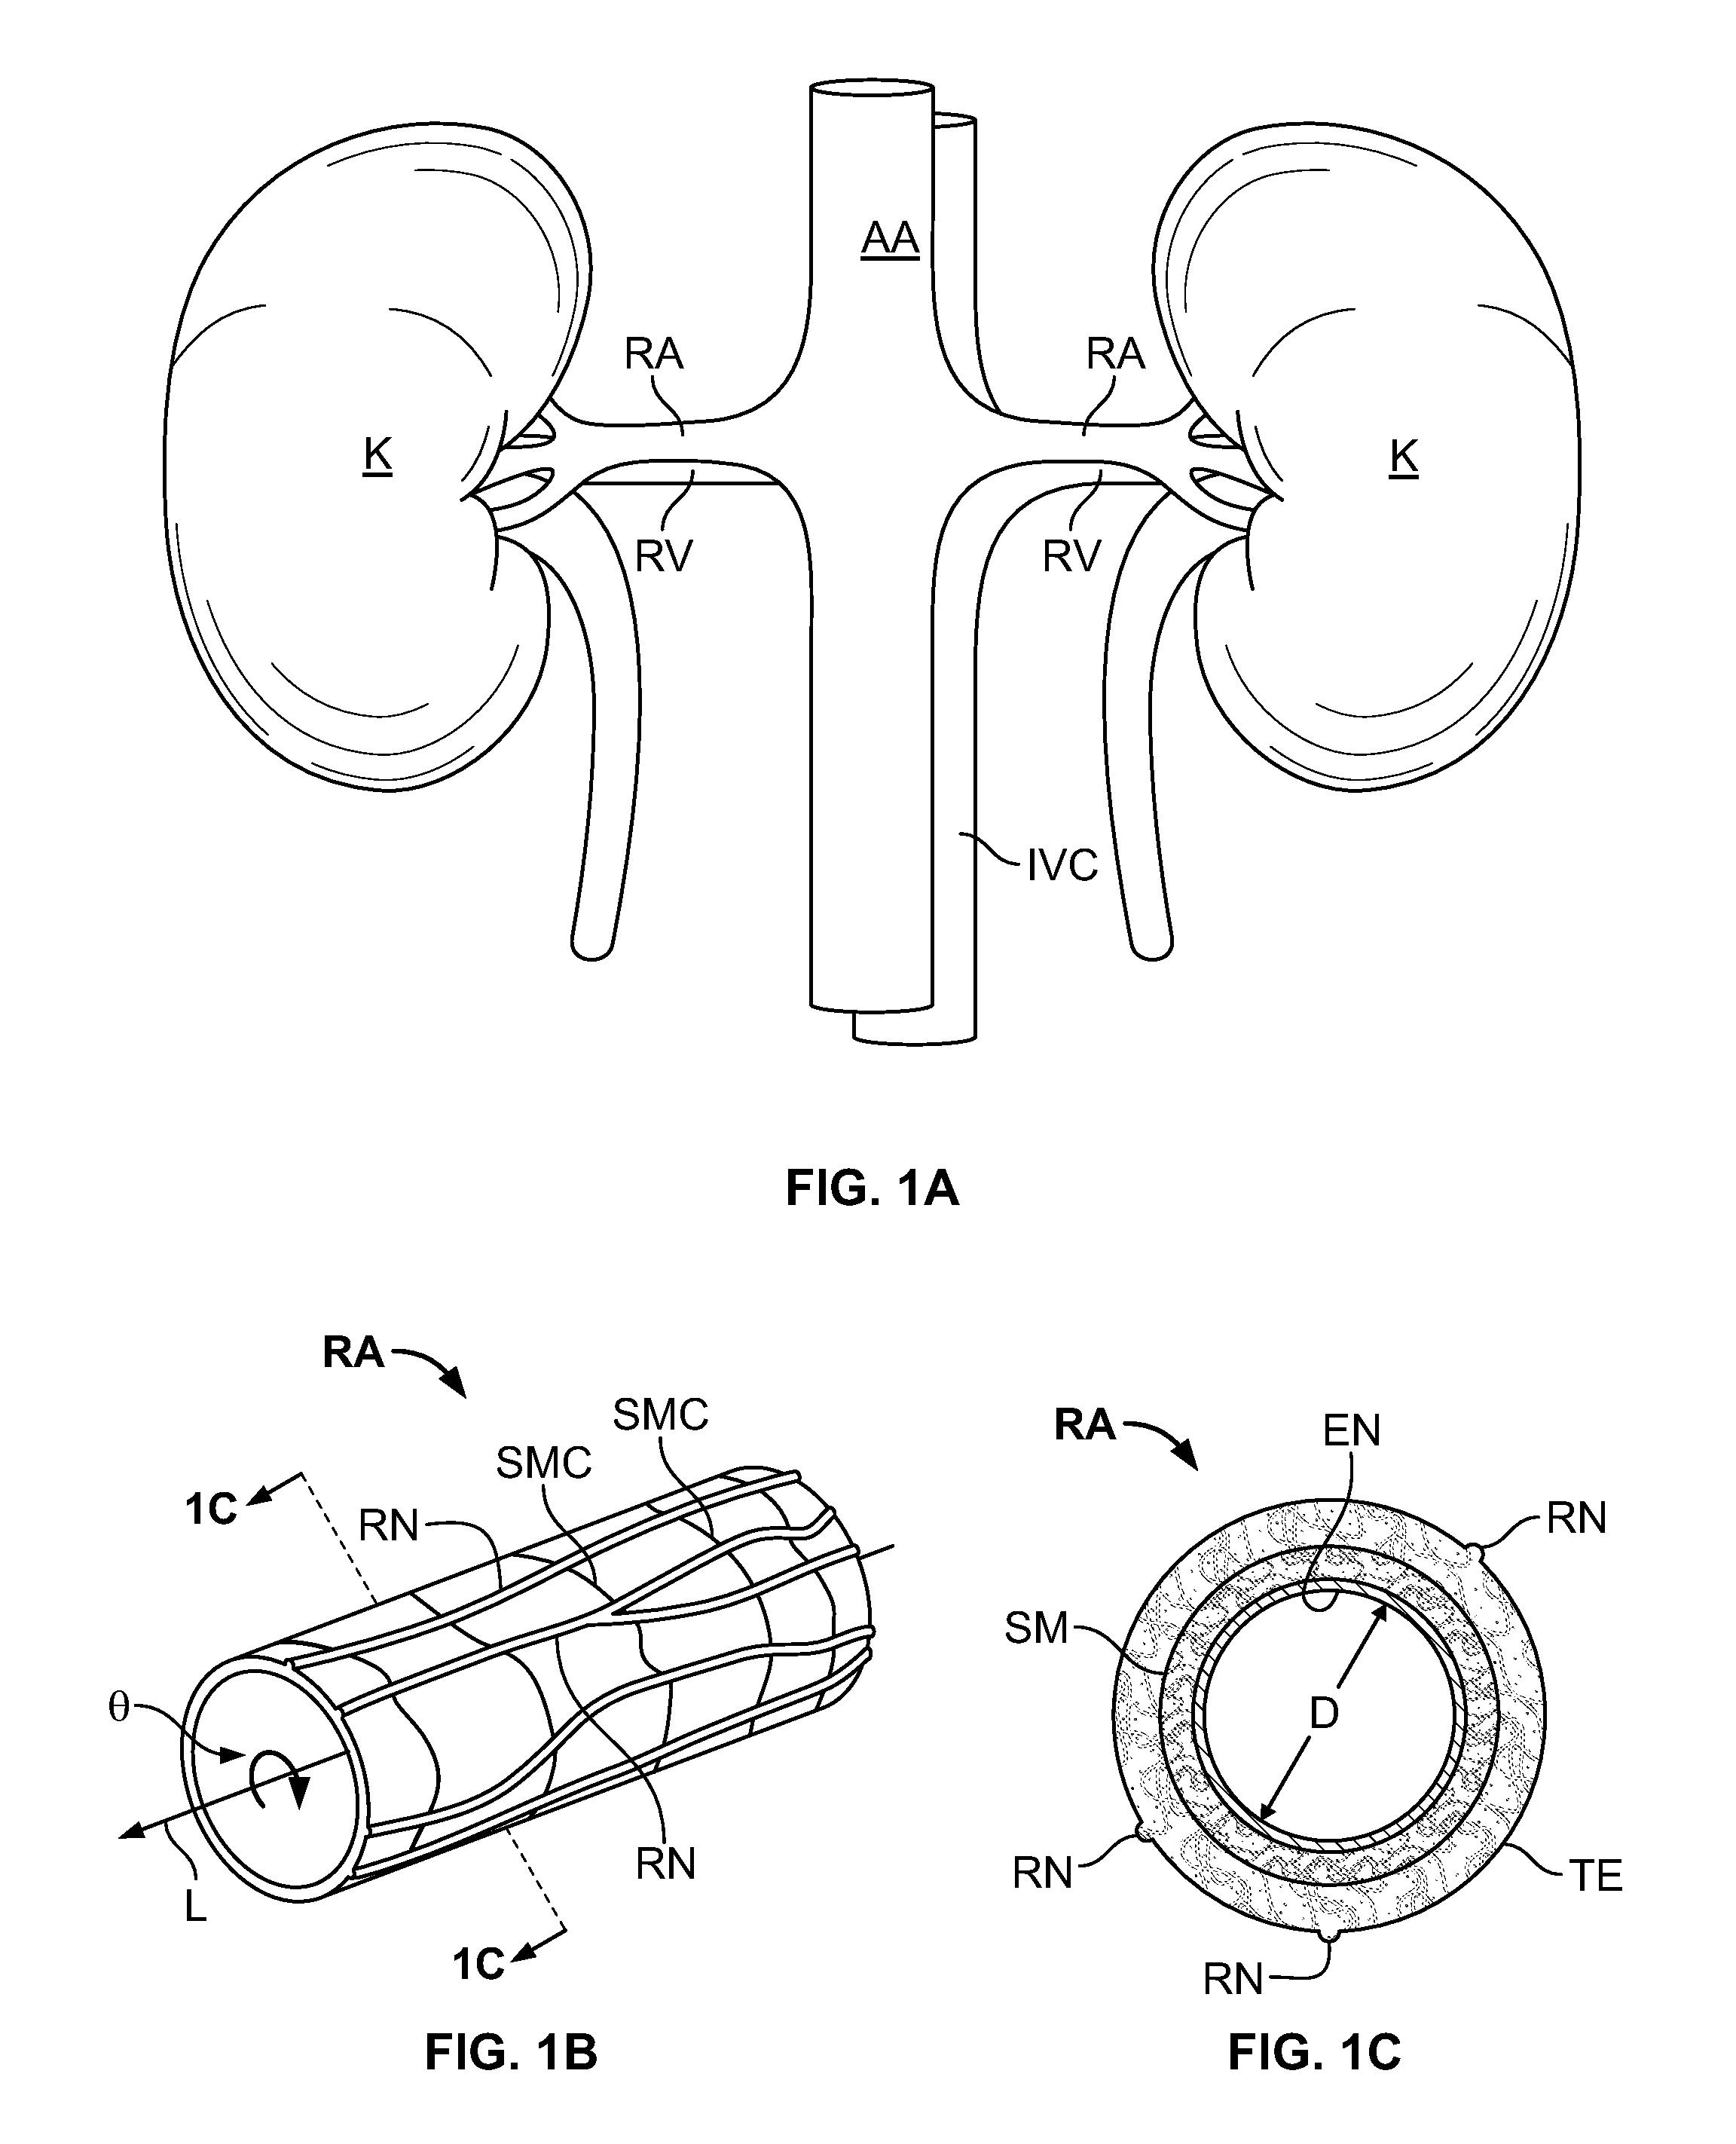 Cryo-induced renal neuromodulation devices and methods